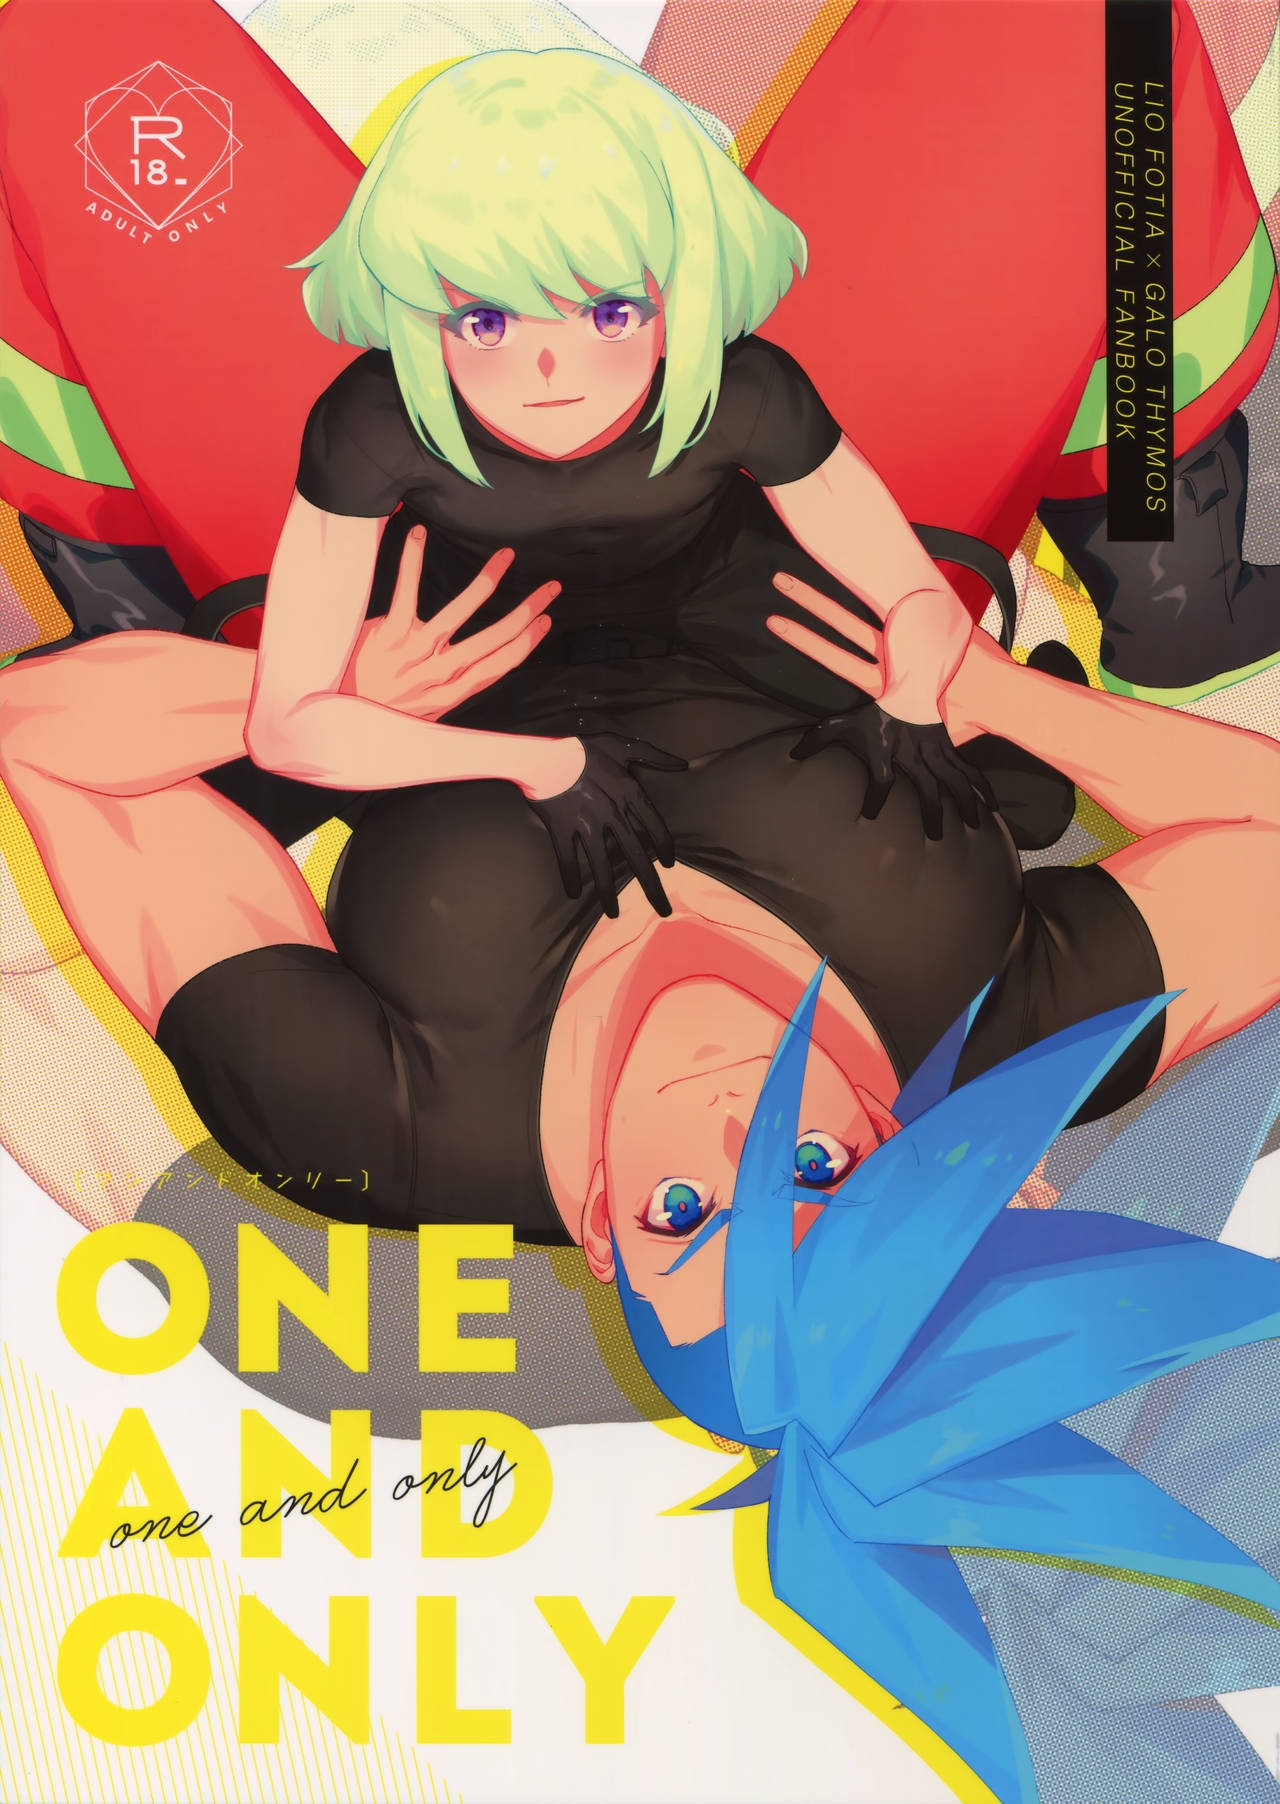 [Uei (Fuo~)] One and Only (Promare) 0